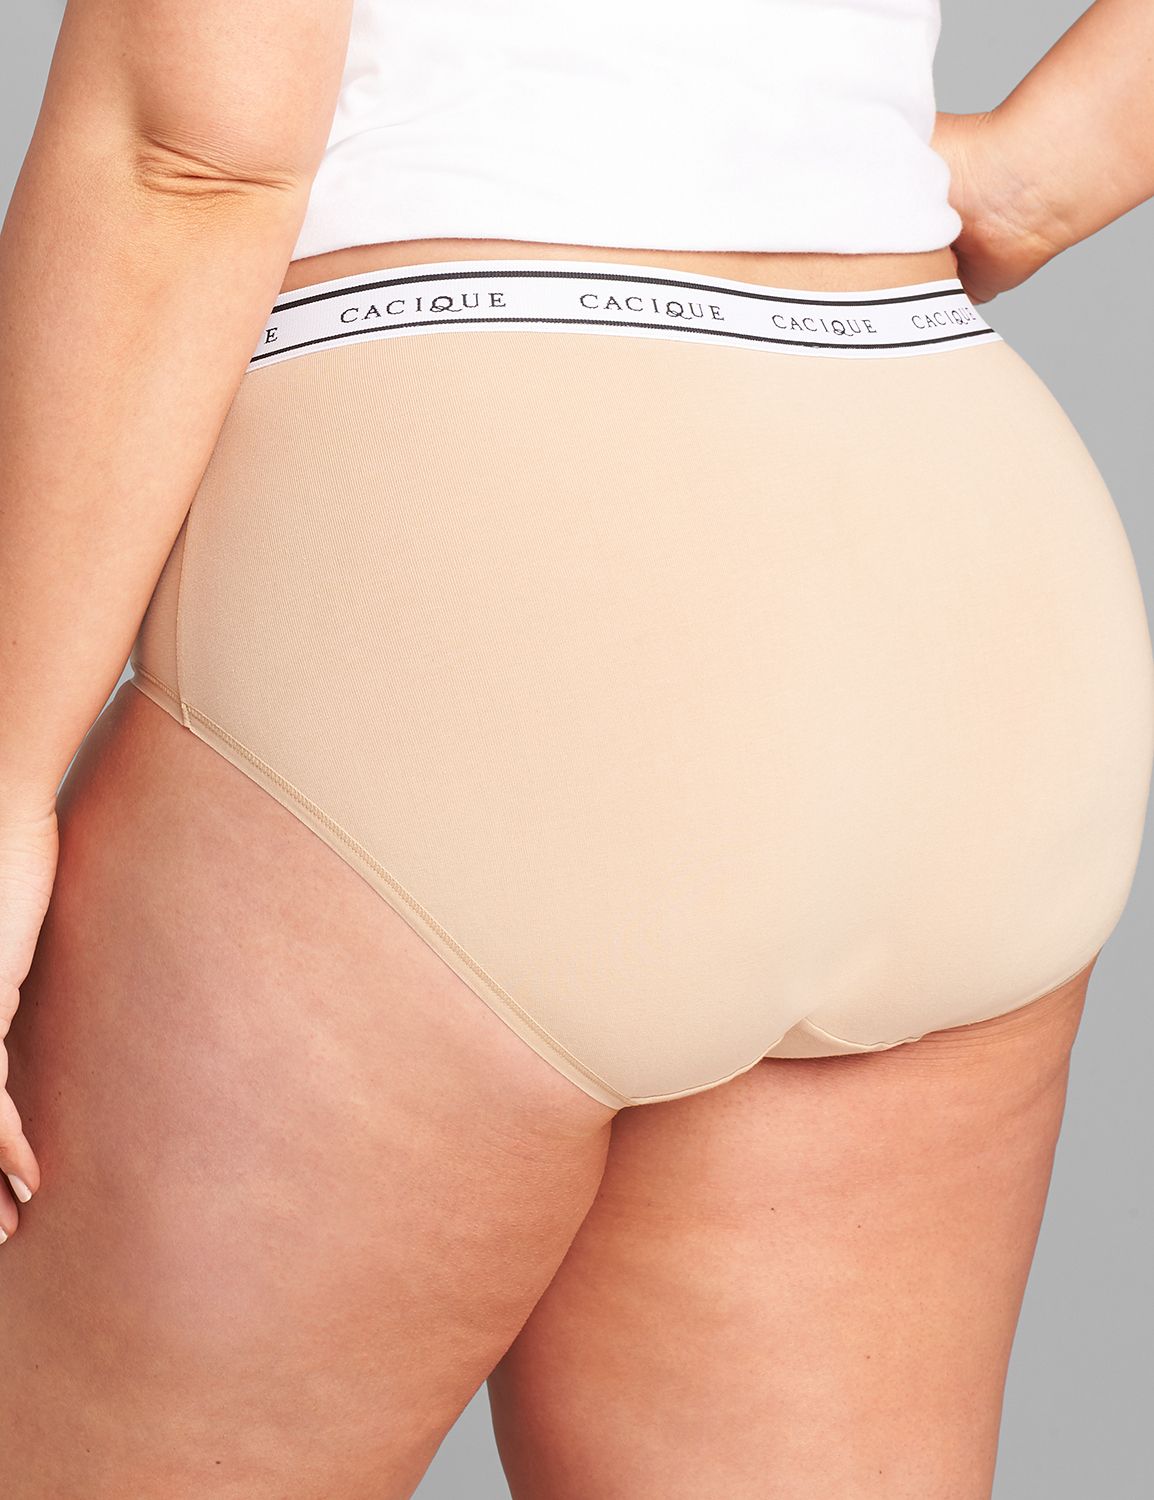 Lane Bryant Cotton Full Brief Panty / Pop The Bubbly